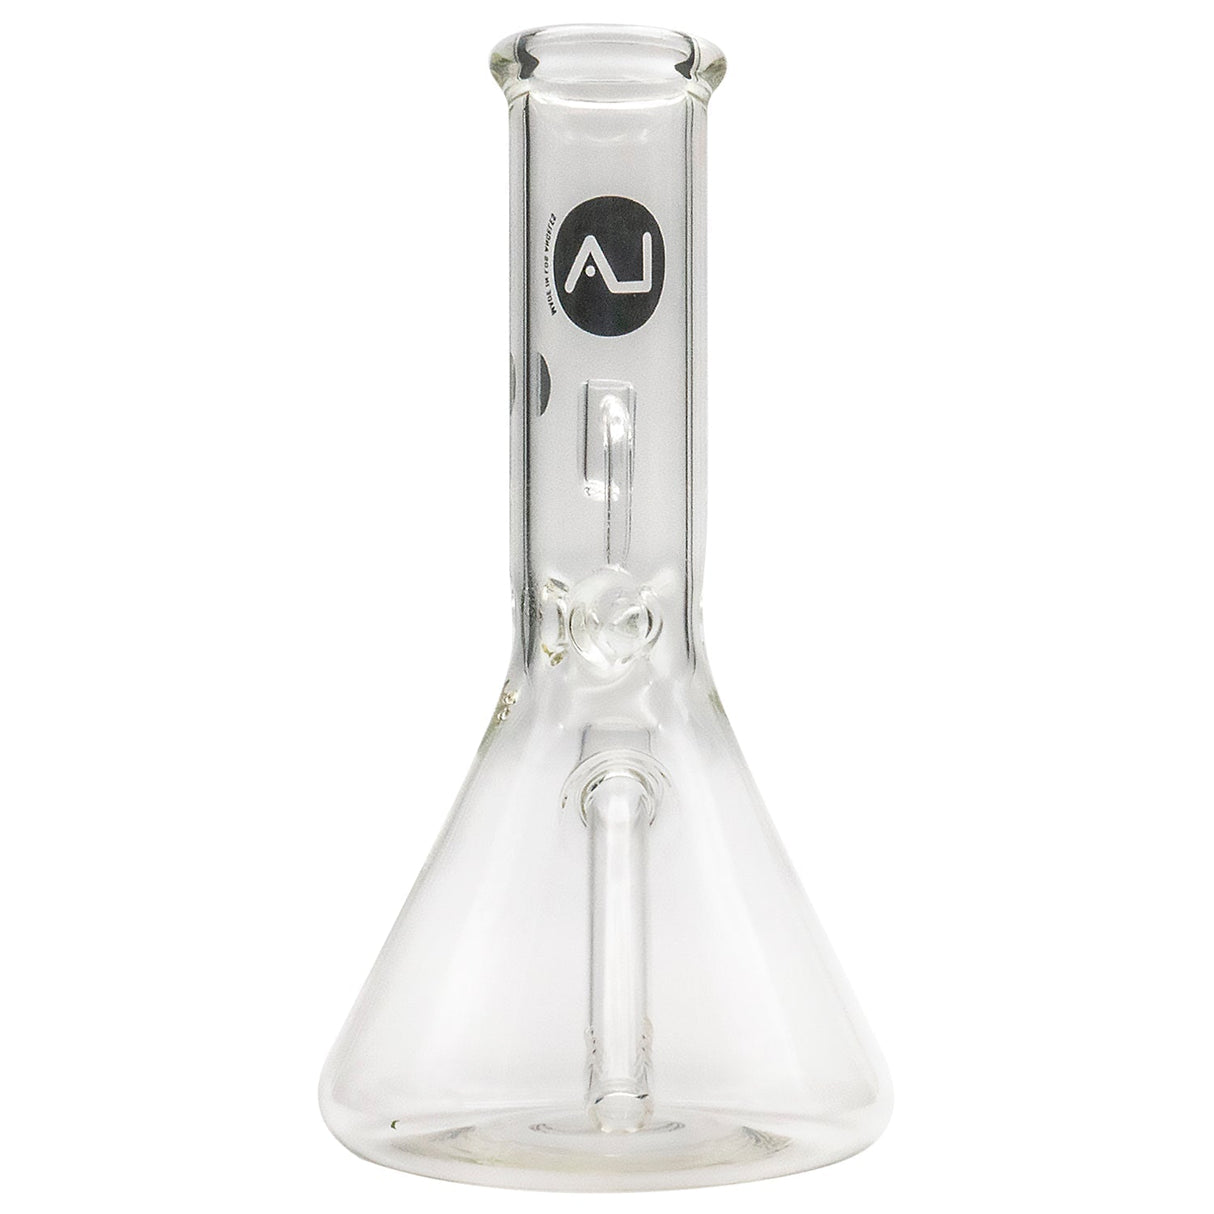 LA Pipes Classic Beaker Concentrate Rig front view, 14mm female joint, for concentrates, USA made